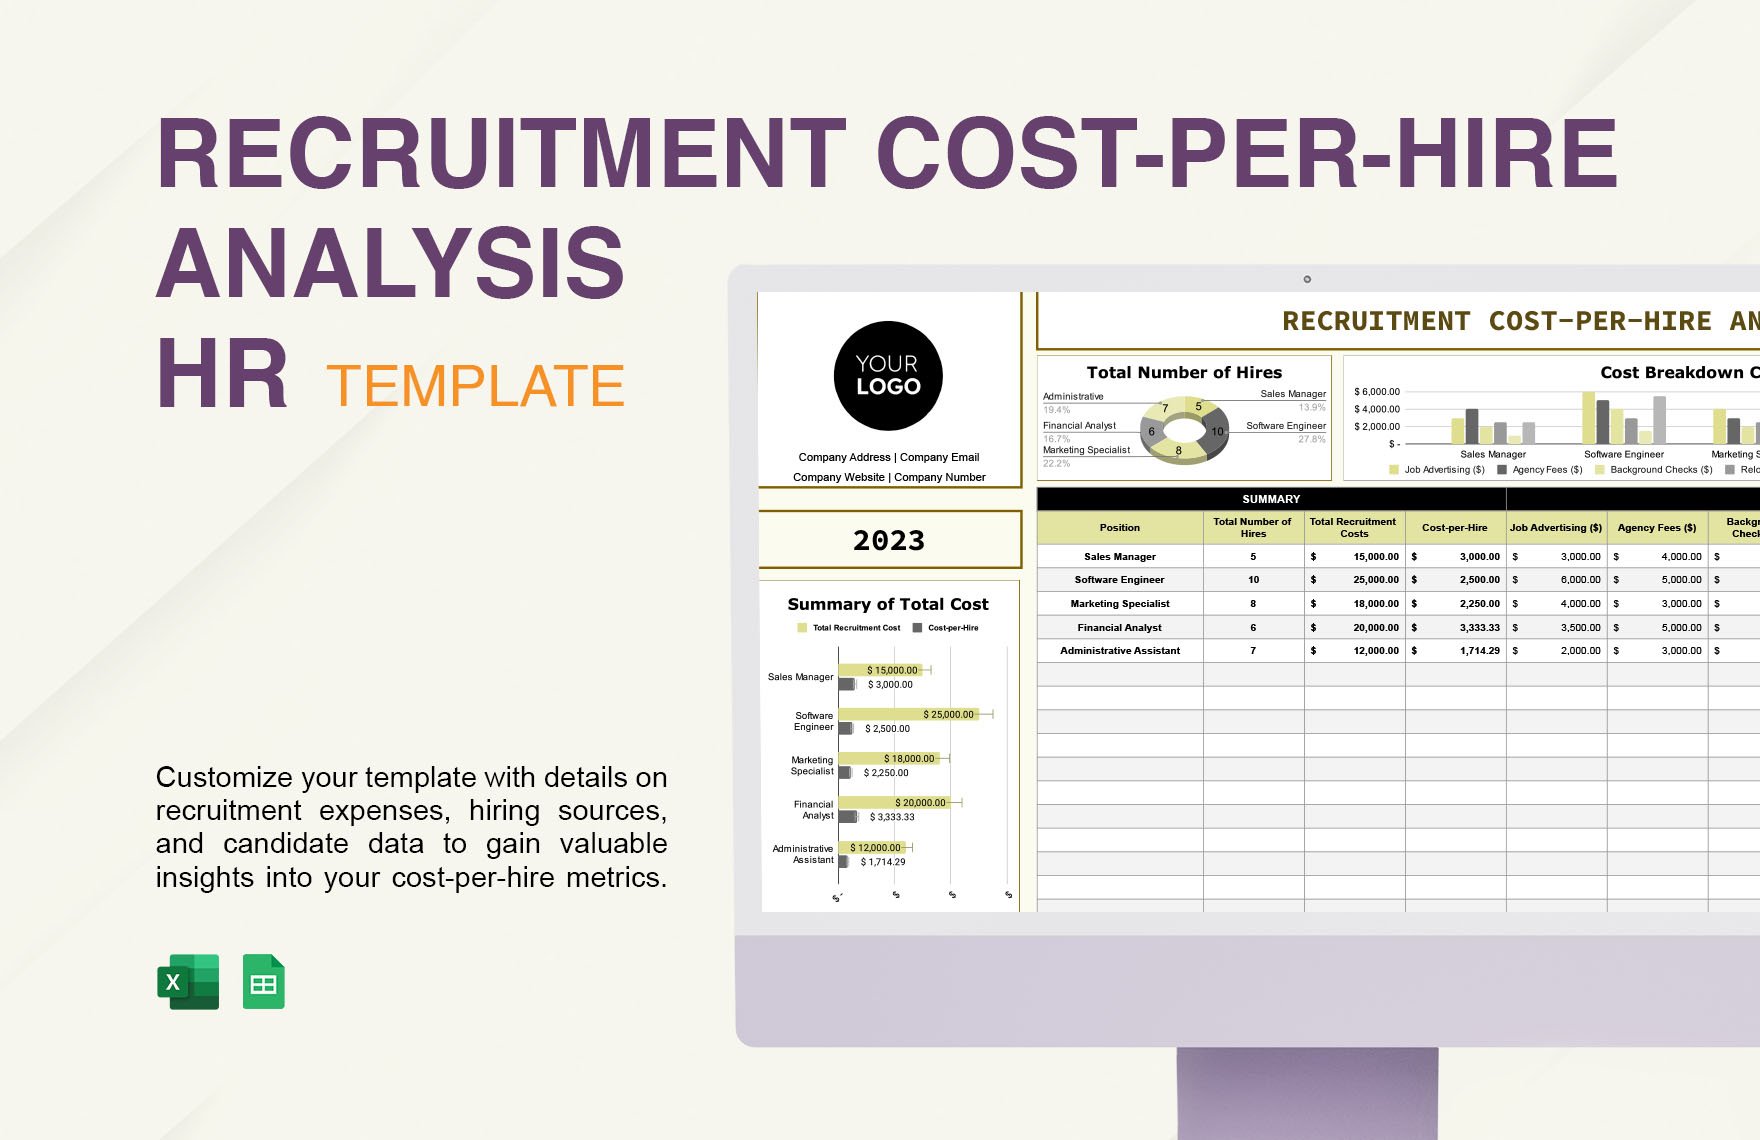 Recruitment Cost-per-Hire Analysis HR Template